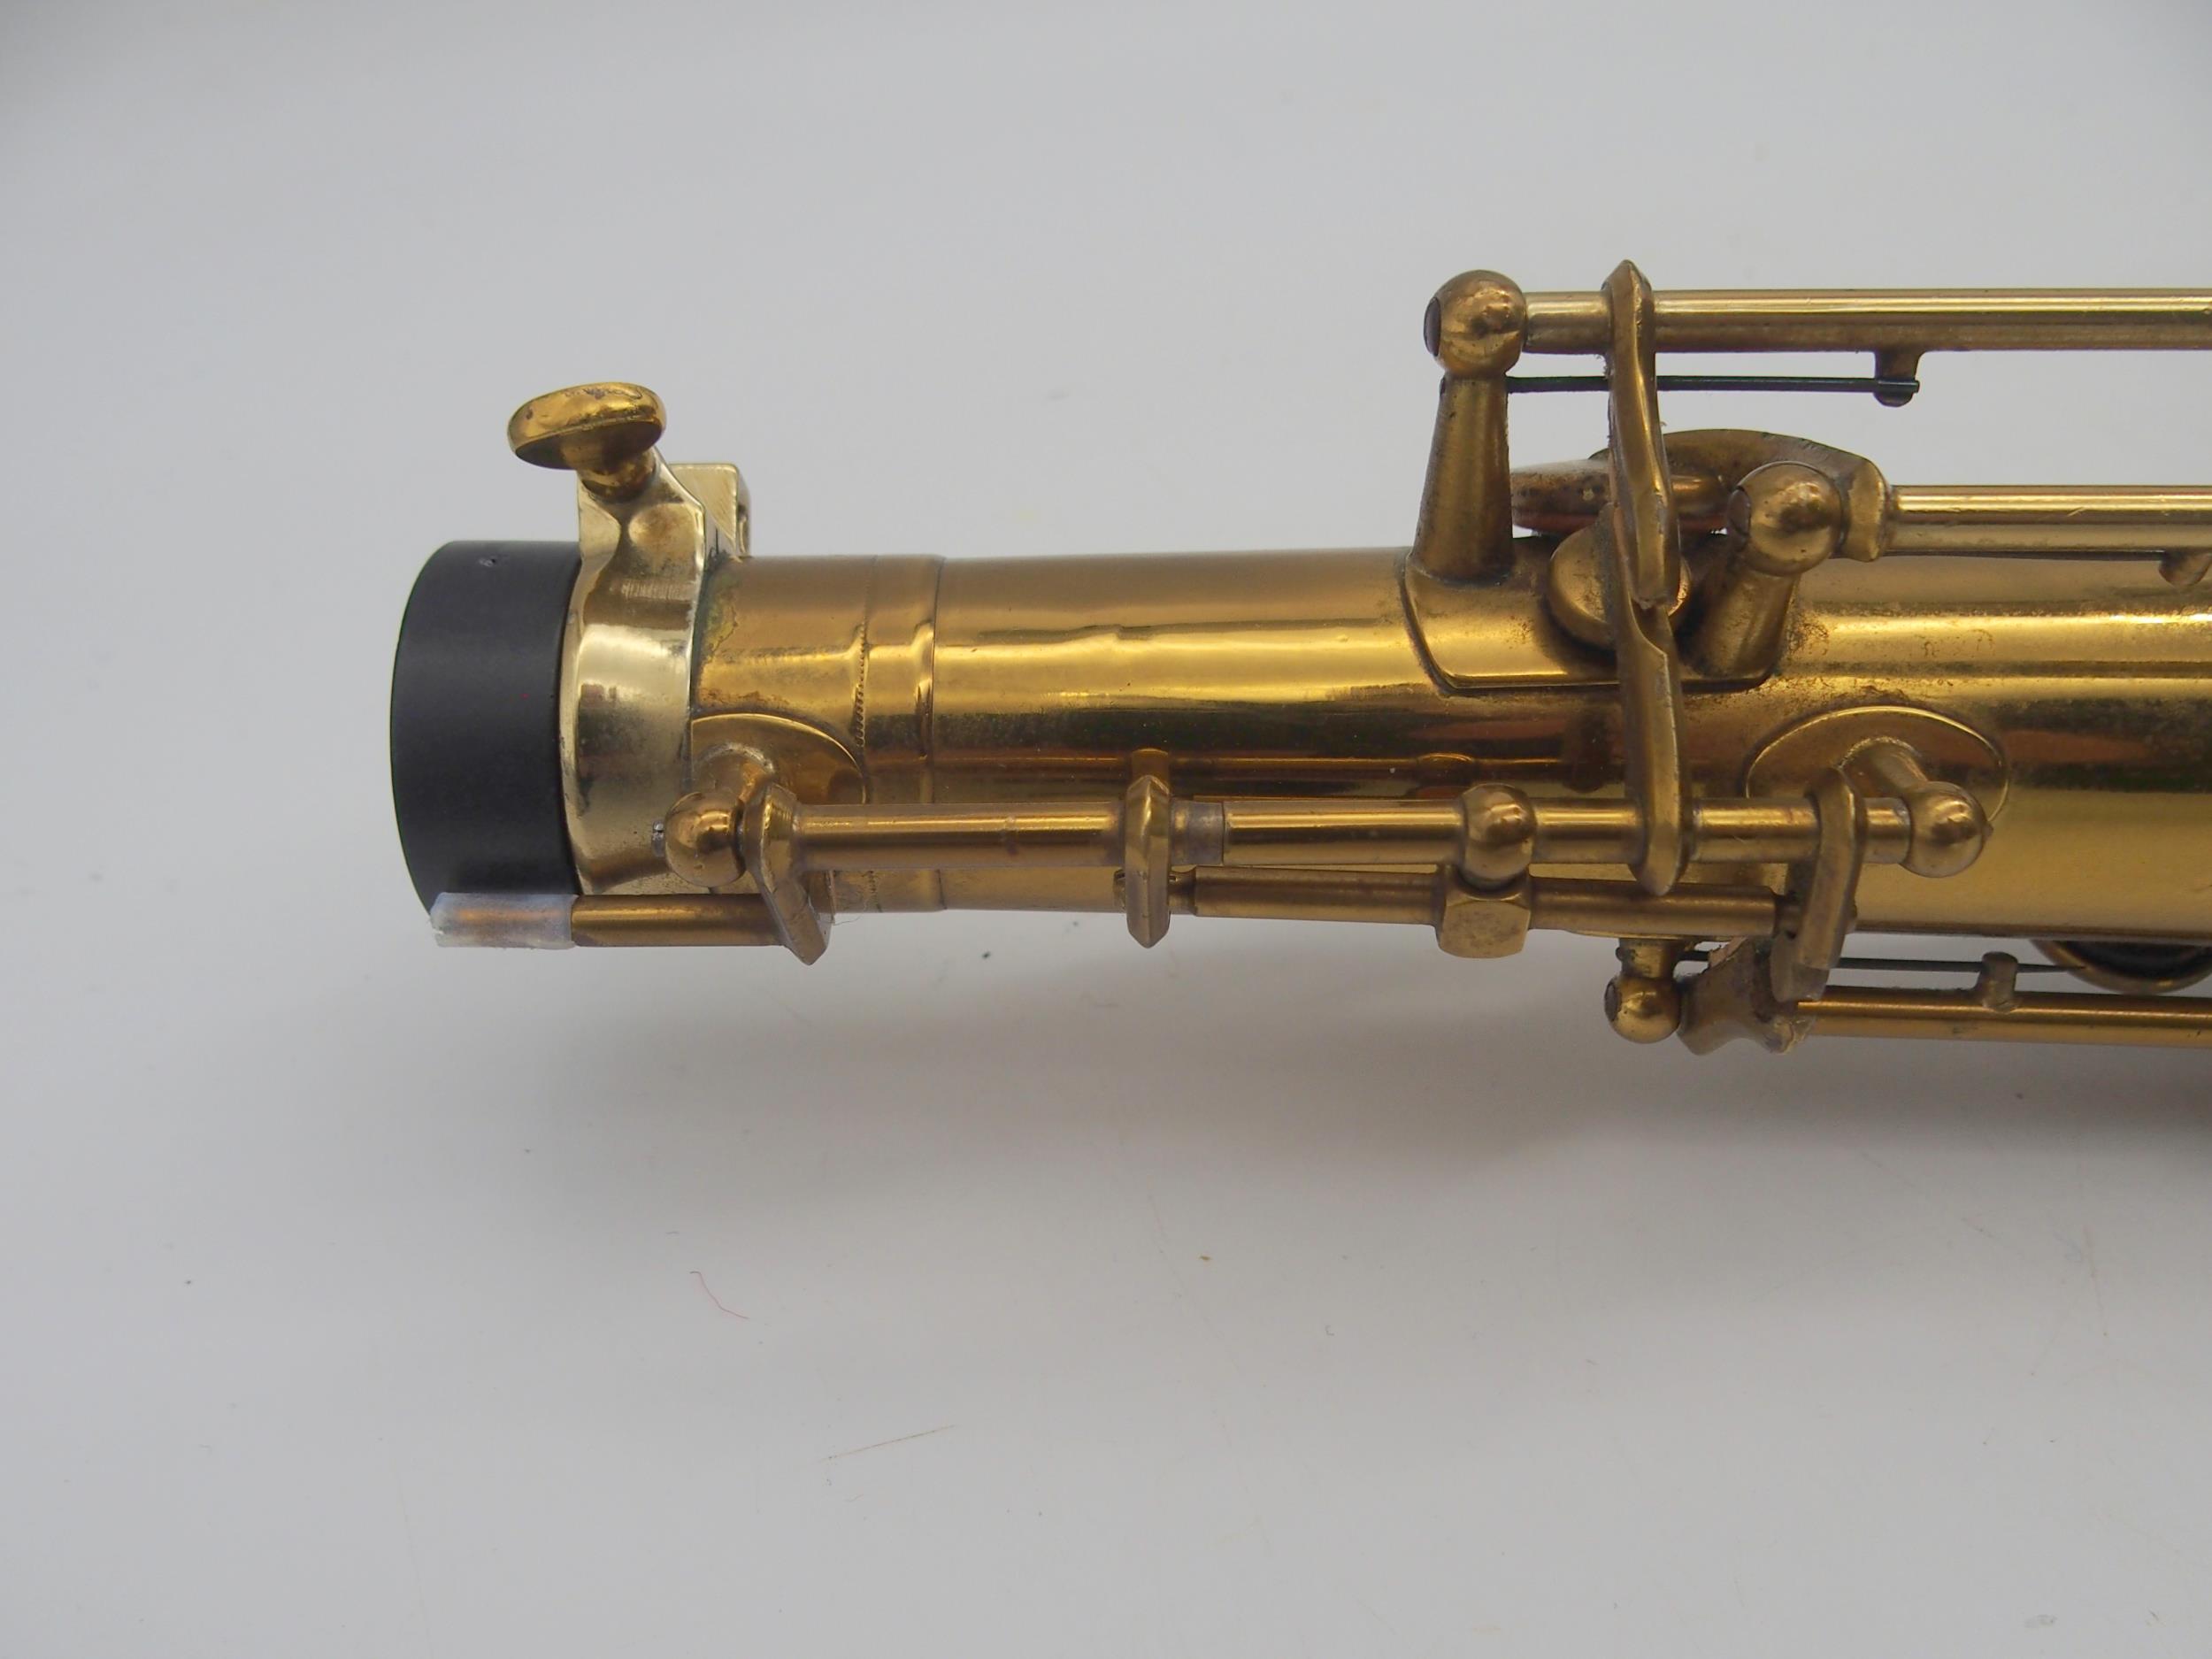 **WITHDRAWN** Pennsylvania Special Baritone Saxophone serial number 261180 engraved "Pensyl - Image 19 of 33